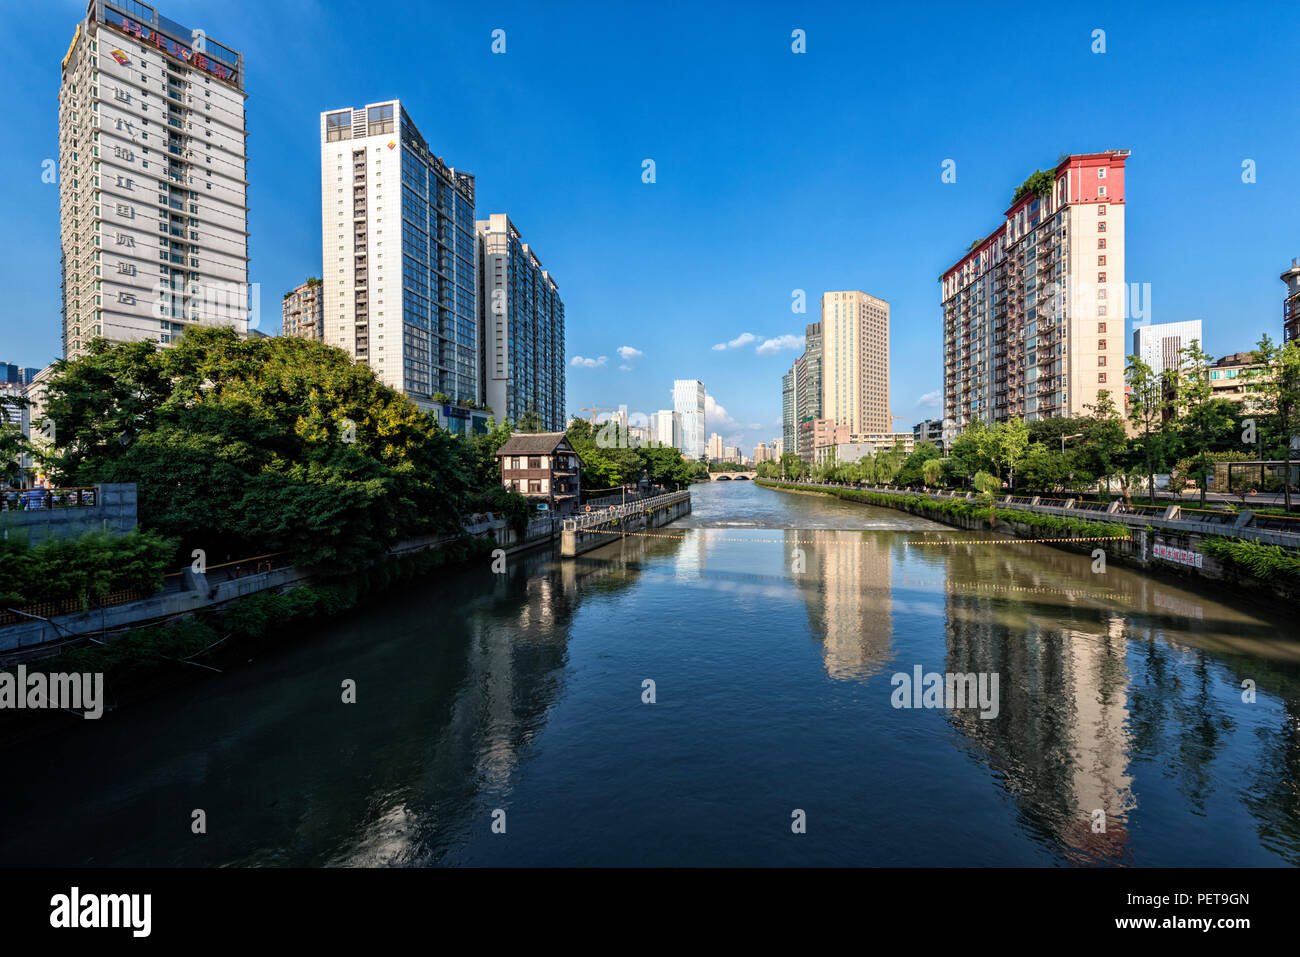 Downtown of Chengdu, Sichuan, China. Chengdu is the largest and the fastest growing city in South West China. Stock Photo